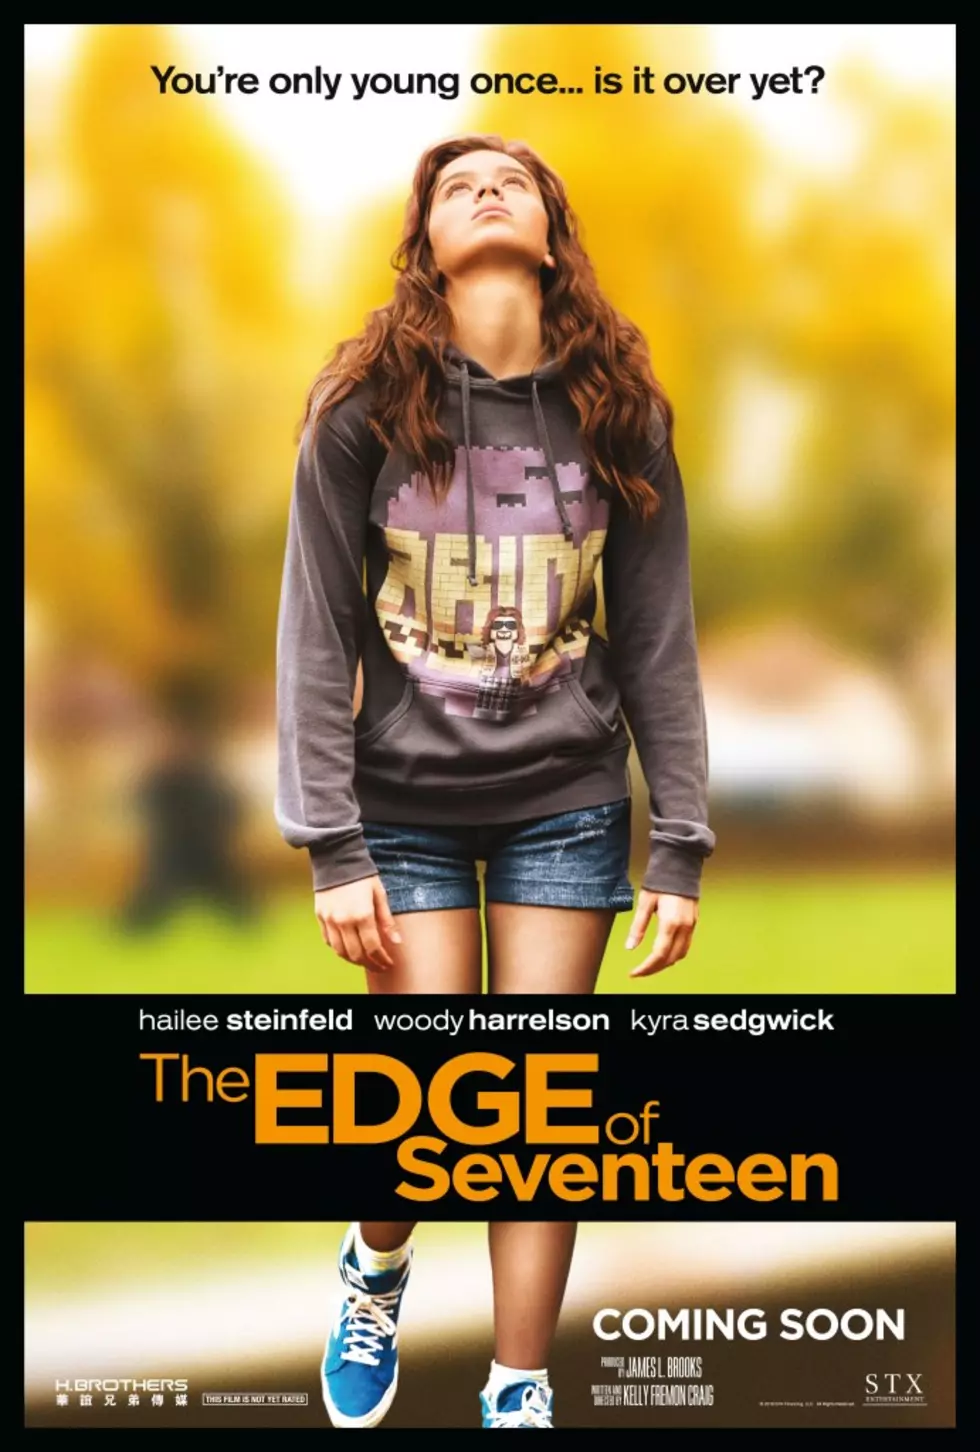 Star 1017 is Giving You a Chance to Win Passes to an Advance Screening of &#8216;Edge of Seventeen&#8217; at Hollywood 16 Cinemas Monday, October 24, 2016